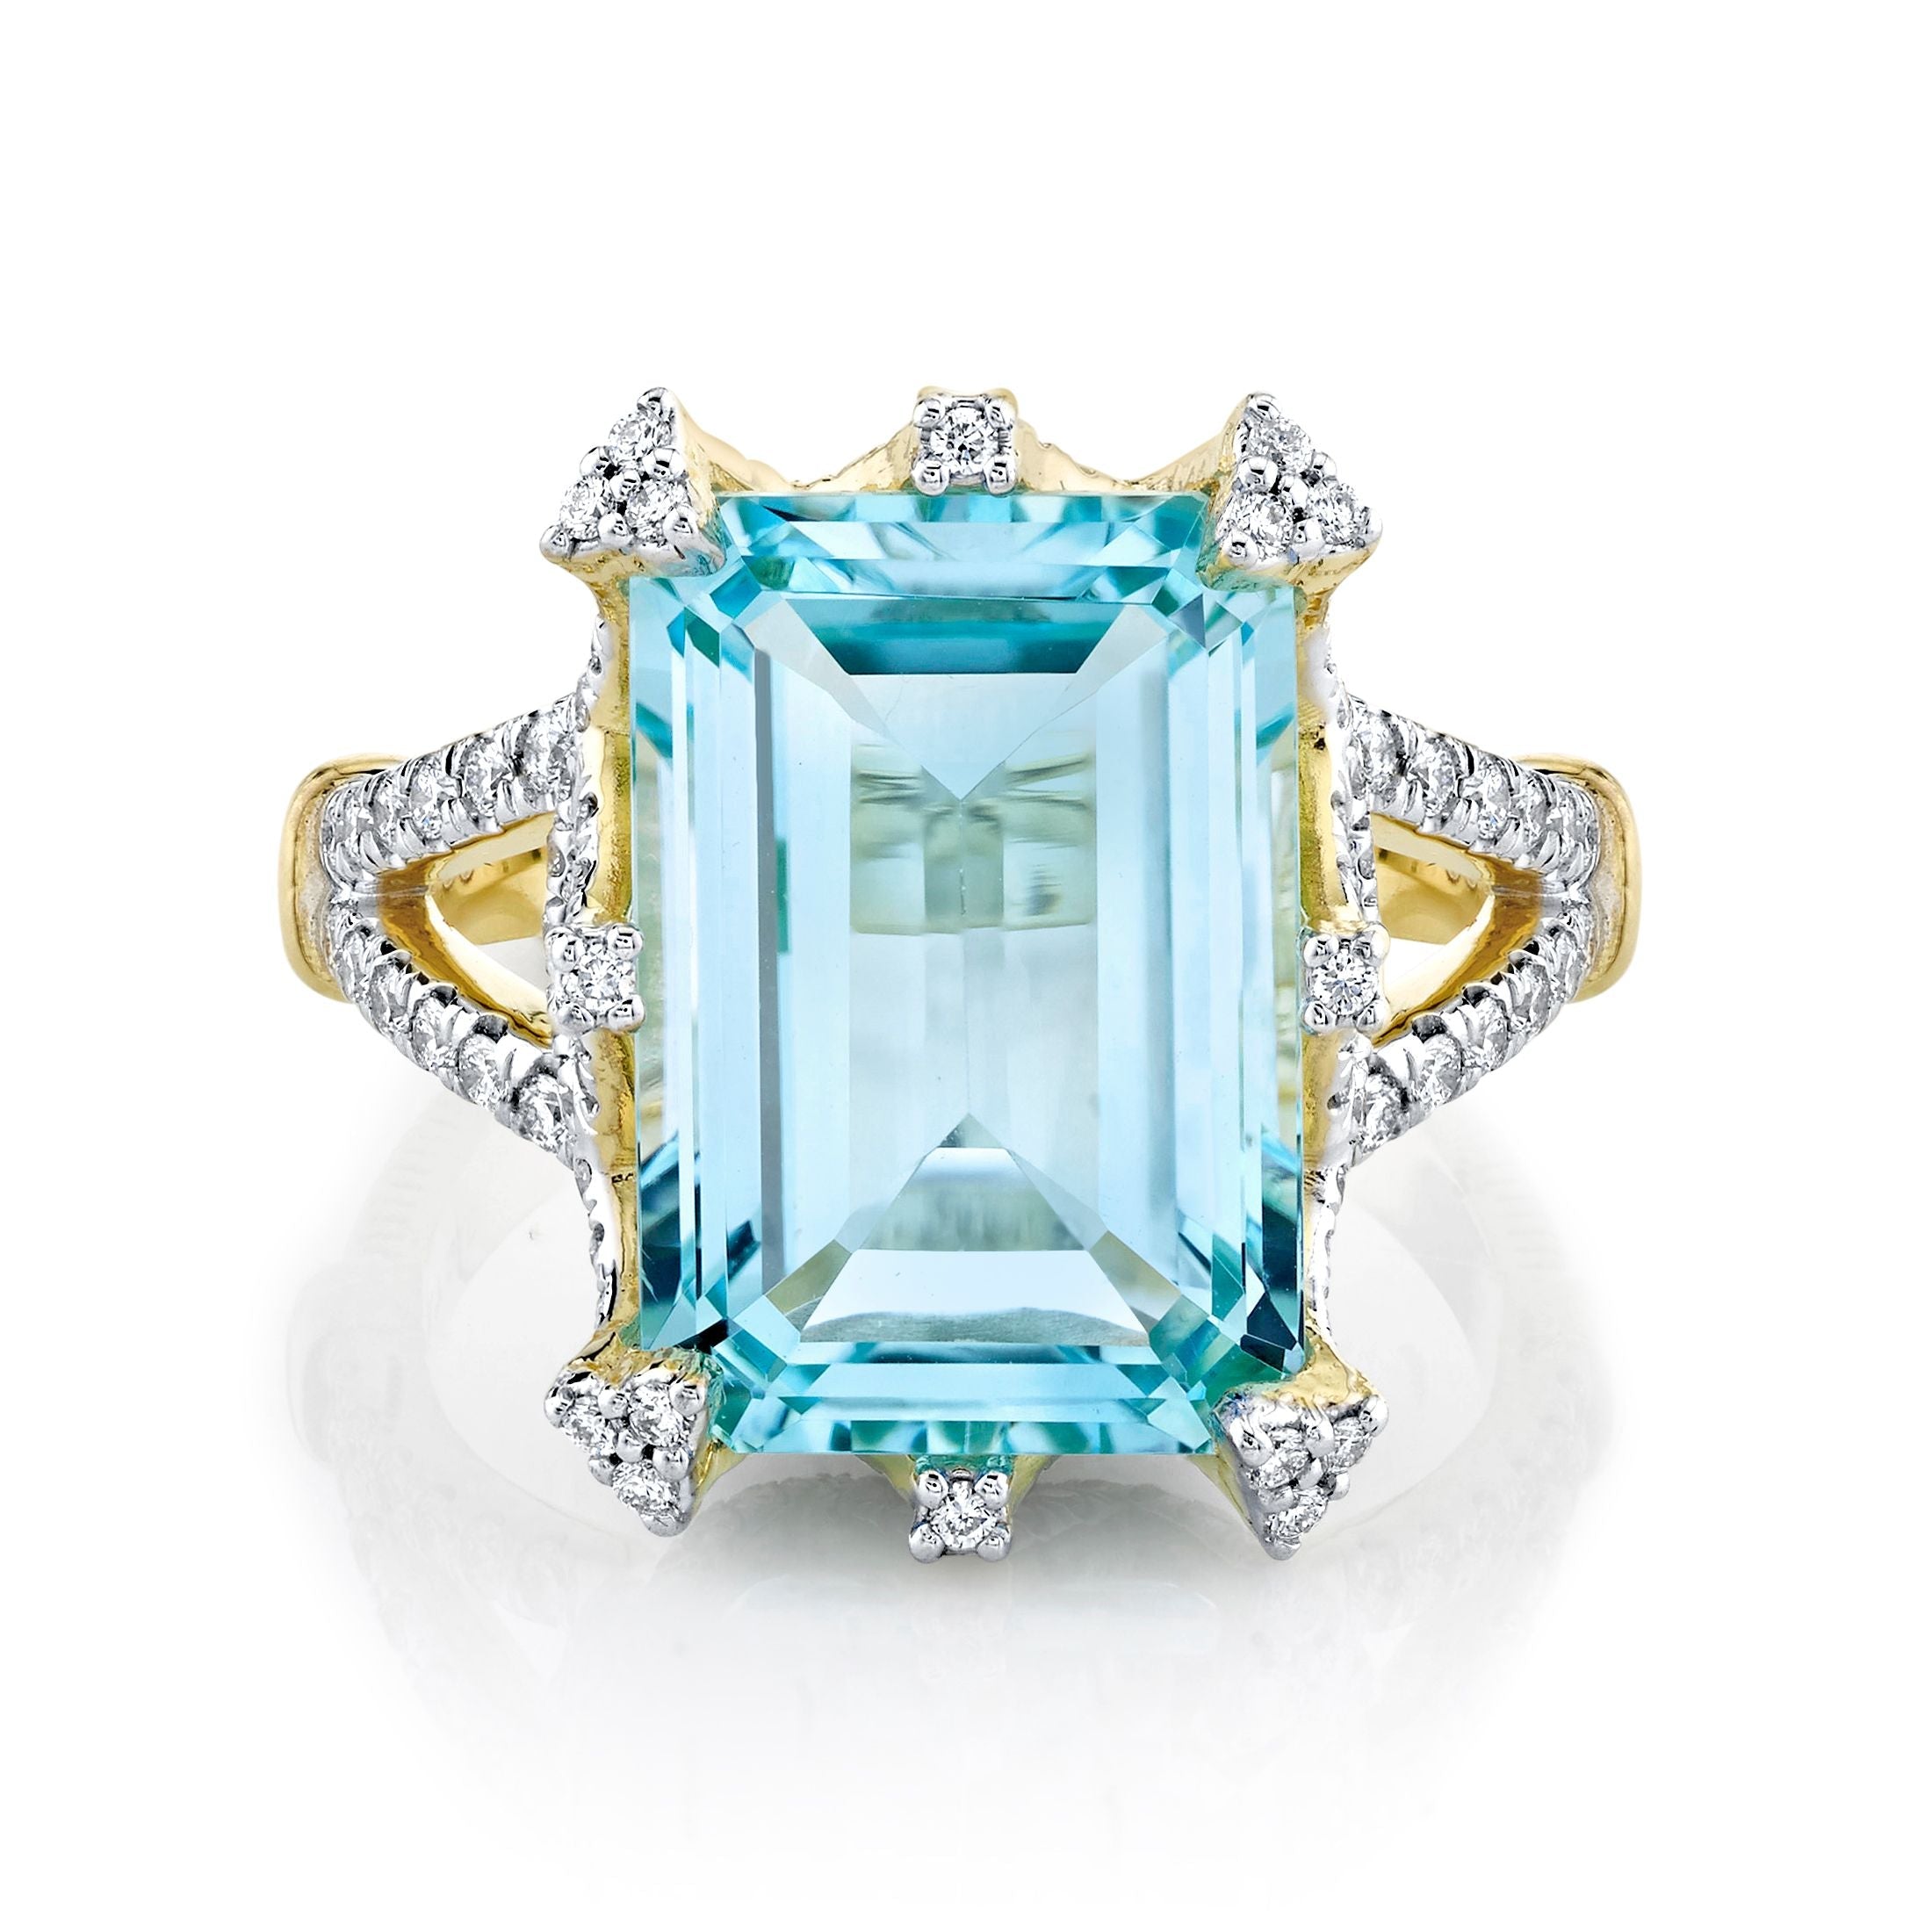 Emerald Cut Sky Blue Topaz Ring with White Diamond Detail